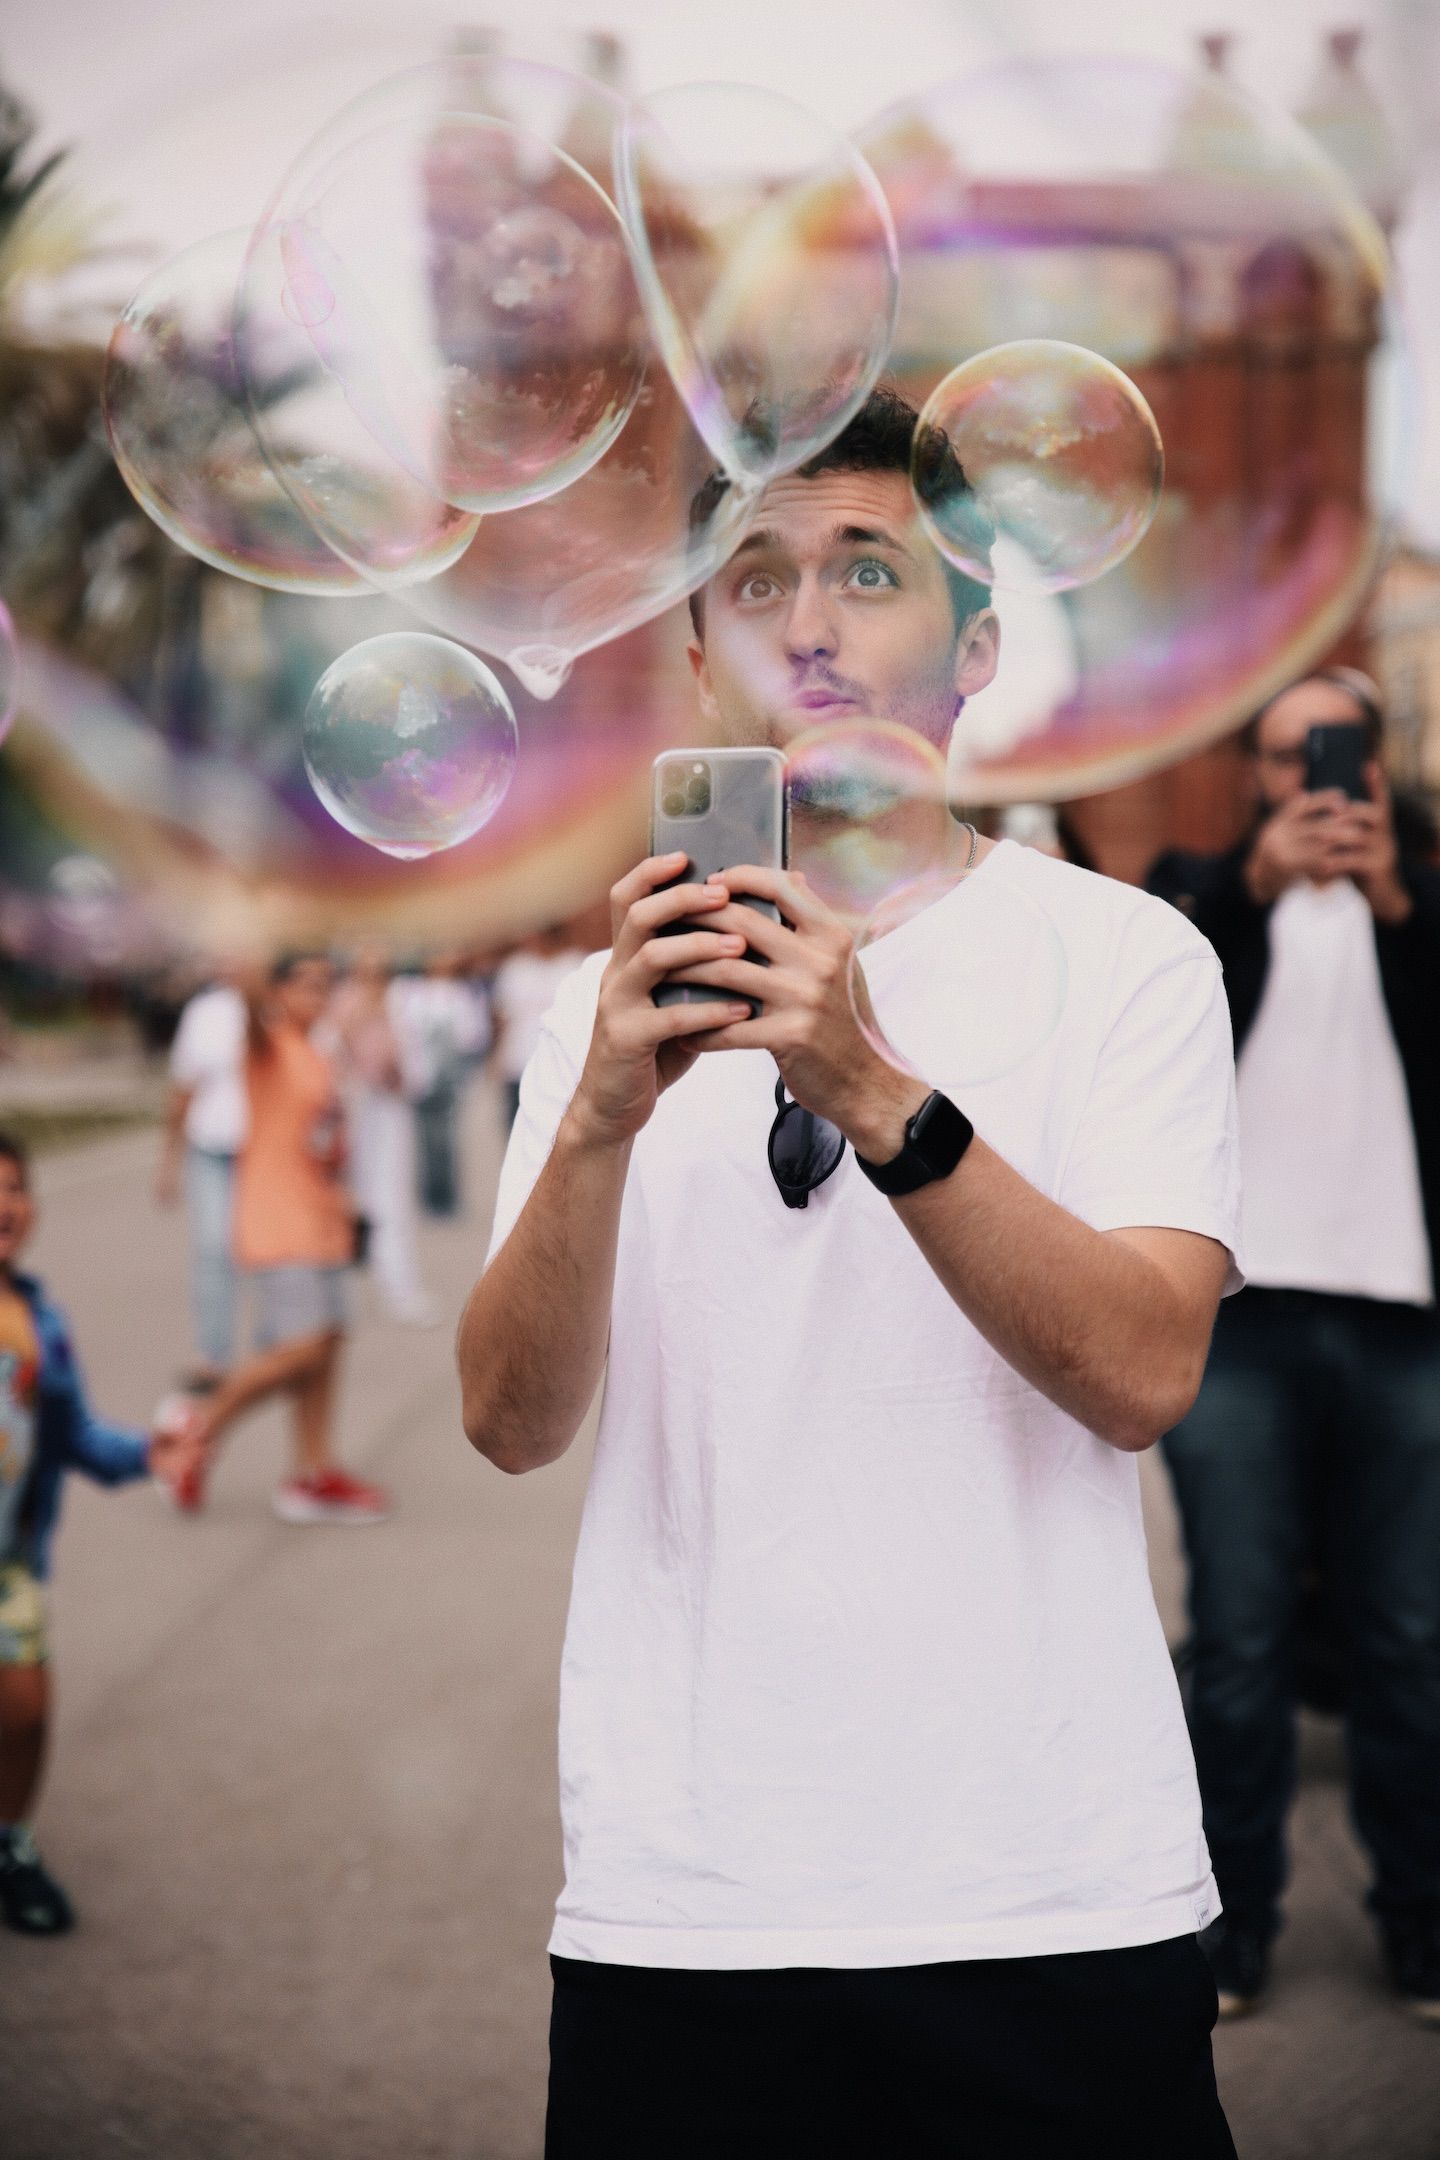 Me watching some soap bubbles and looking fascinated.